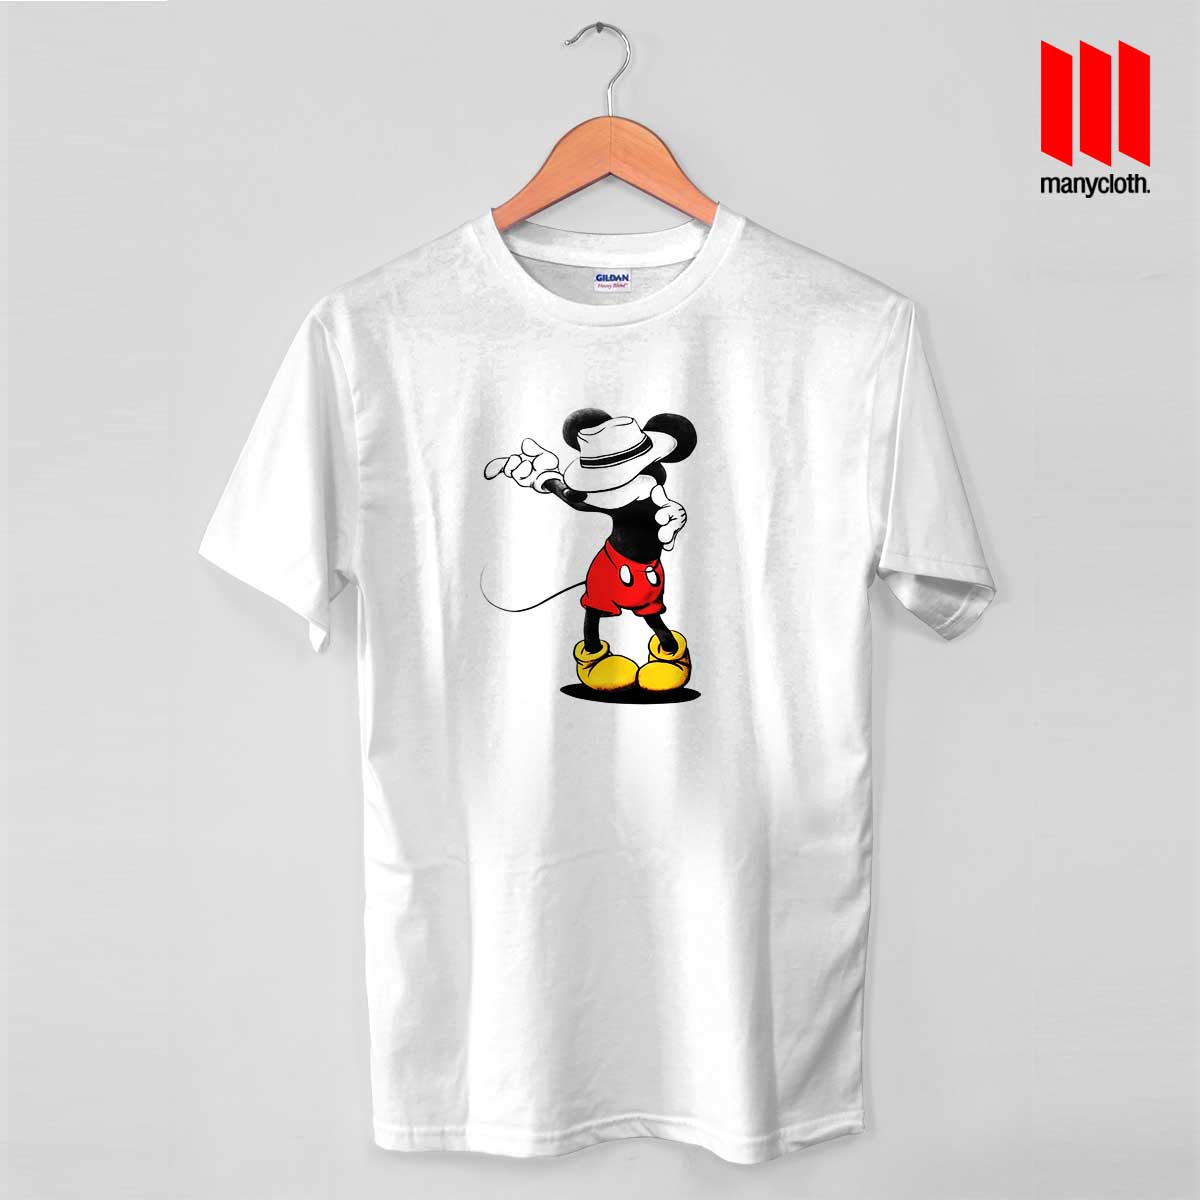 Mickey Mouse MJ Michael Jackson Style Funny T Shirt - ManyCloth.com